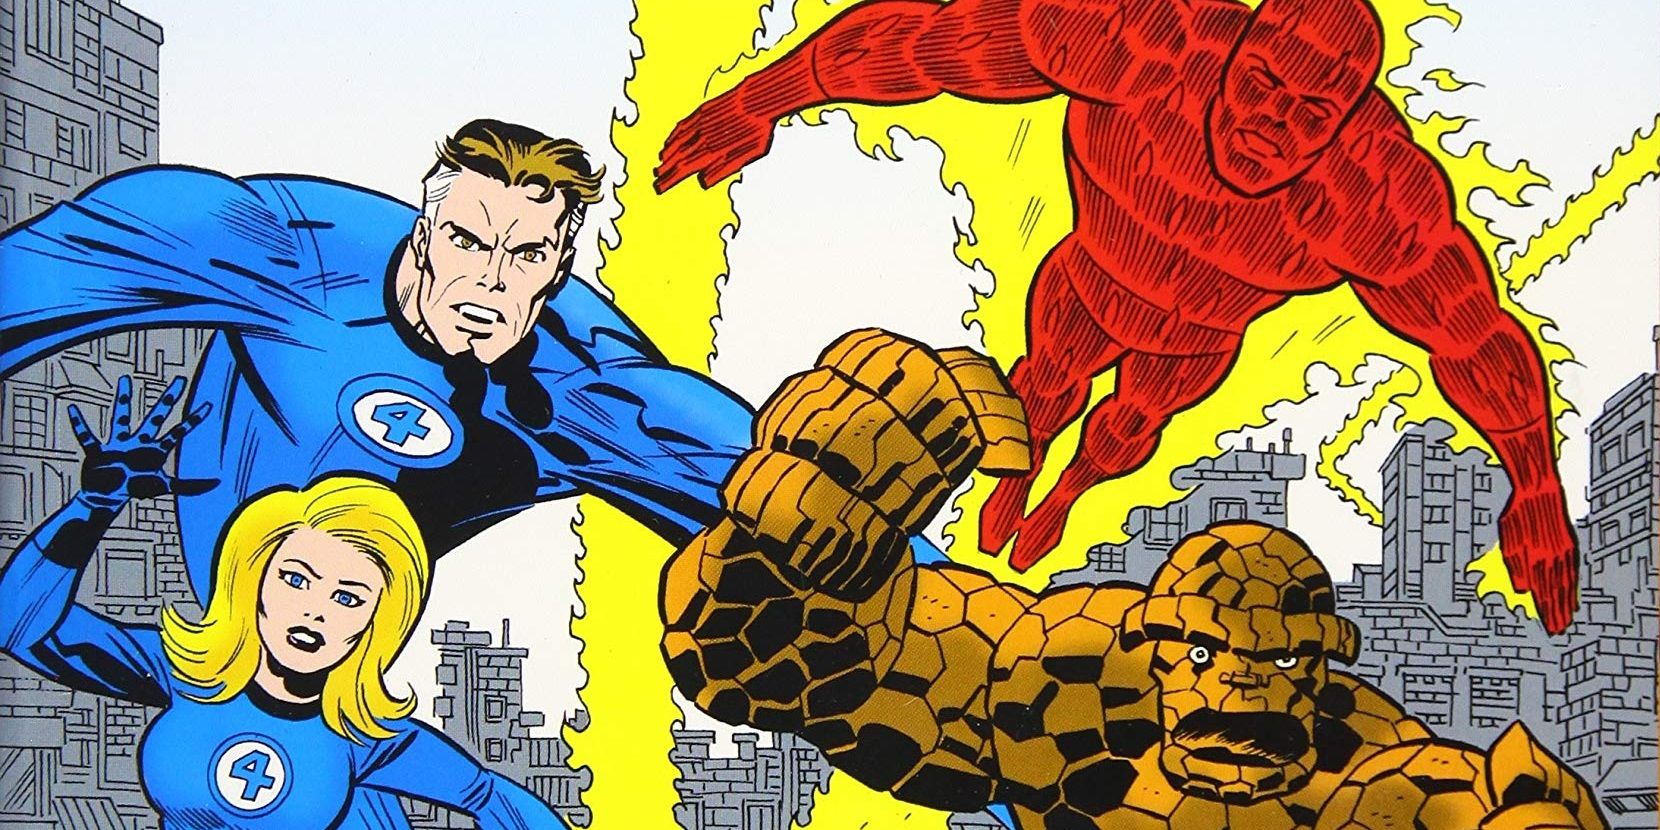 The Fantastic Four in the Marvel comics